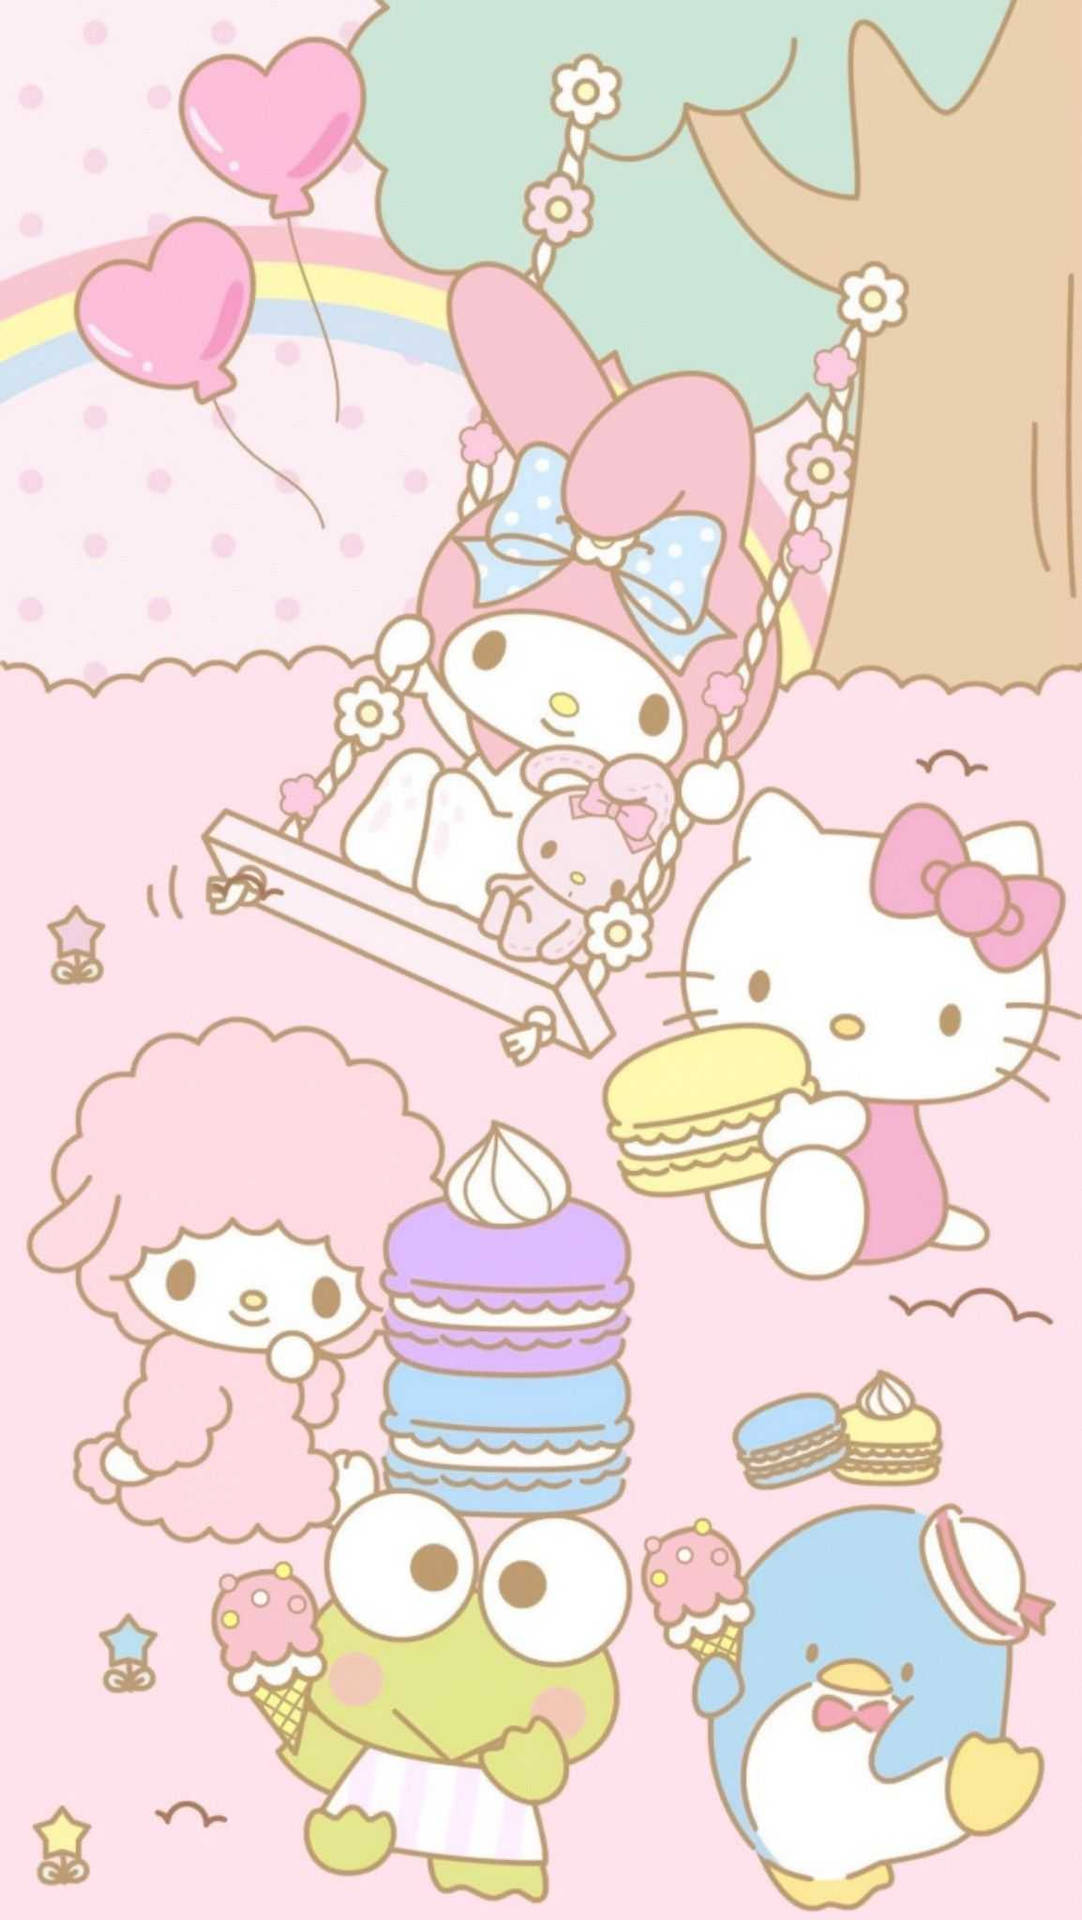 Sanrio Characters Eating Macaroons Background